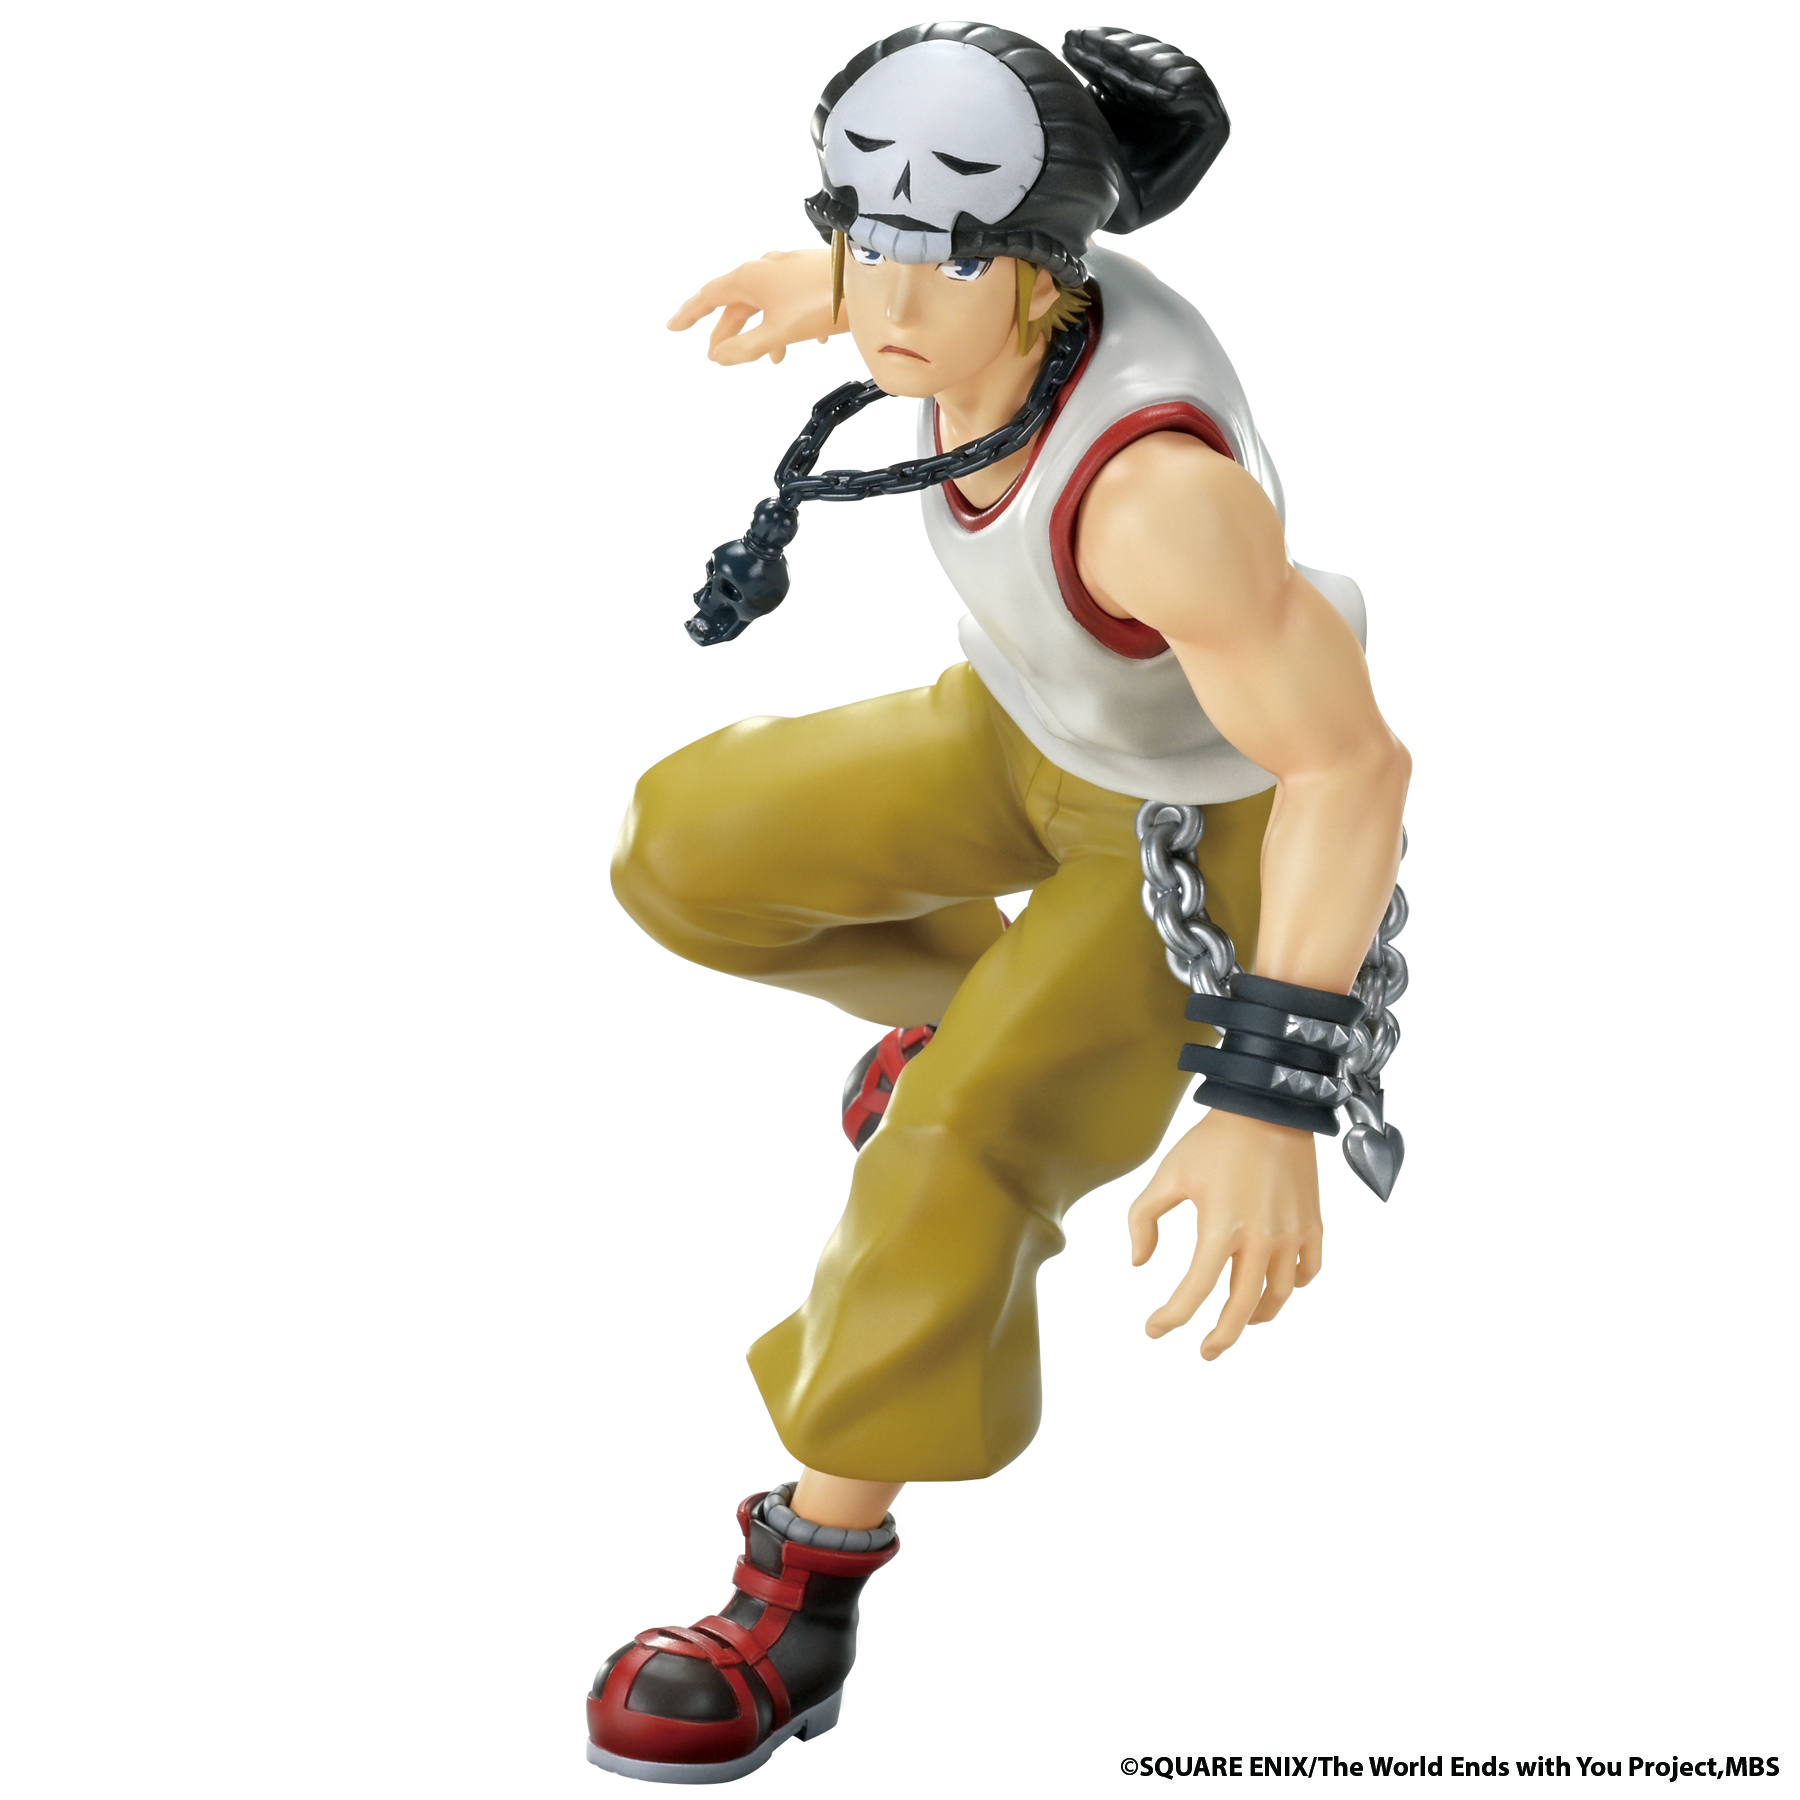 TWEWY WORLD ENDS W/YOU THE ANIME BEAT FIGURE